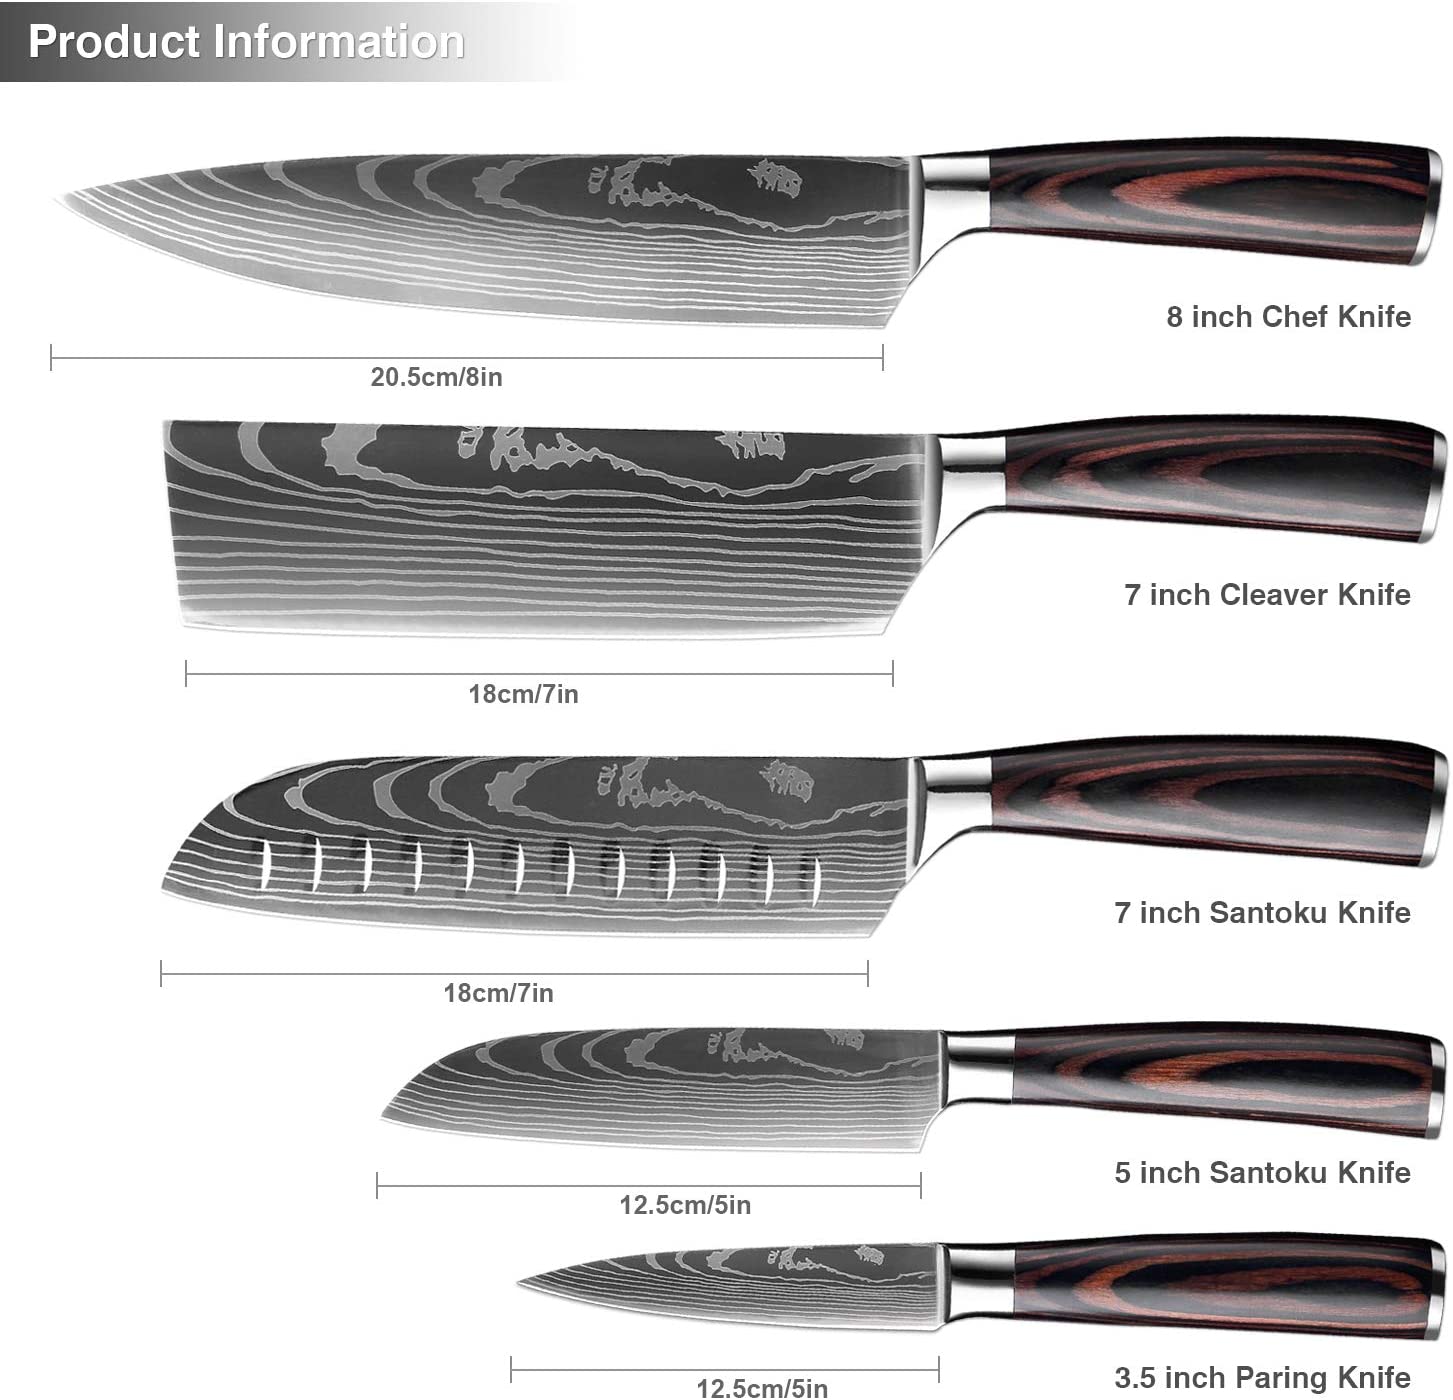 XITUO Chef Knife Set - 5 Pieces